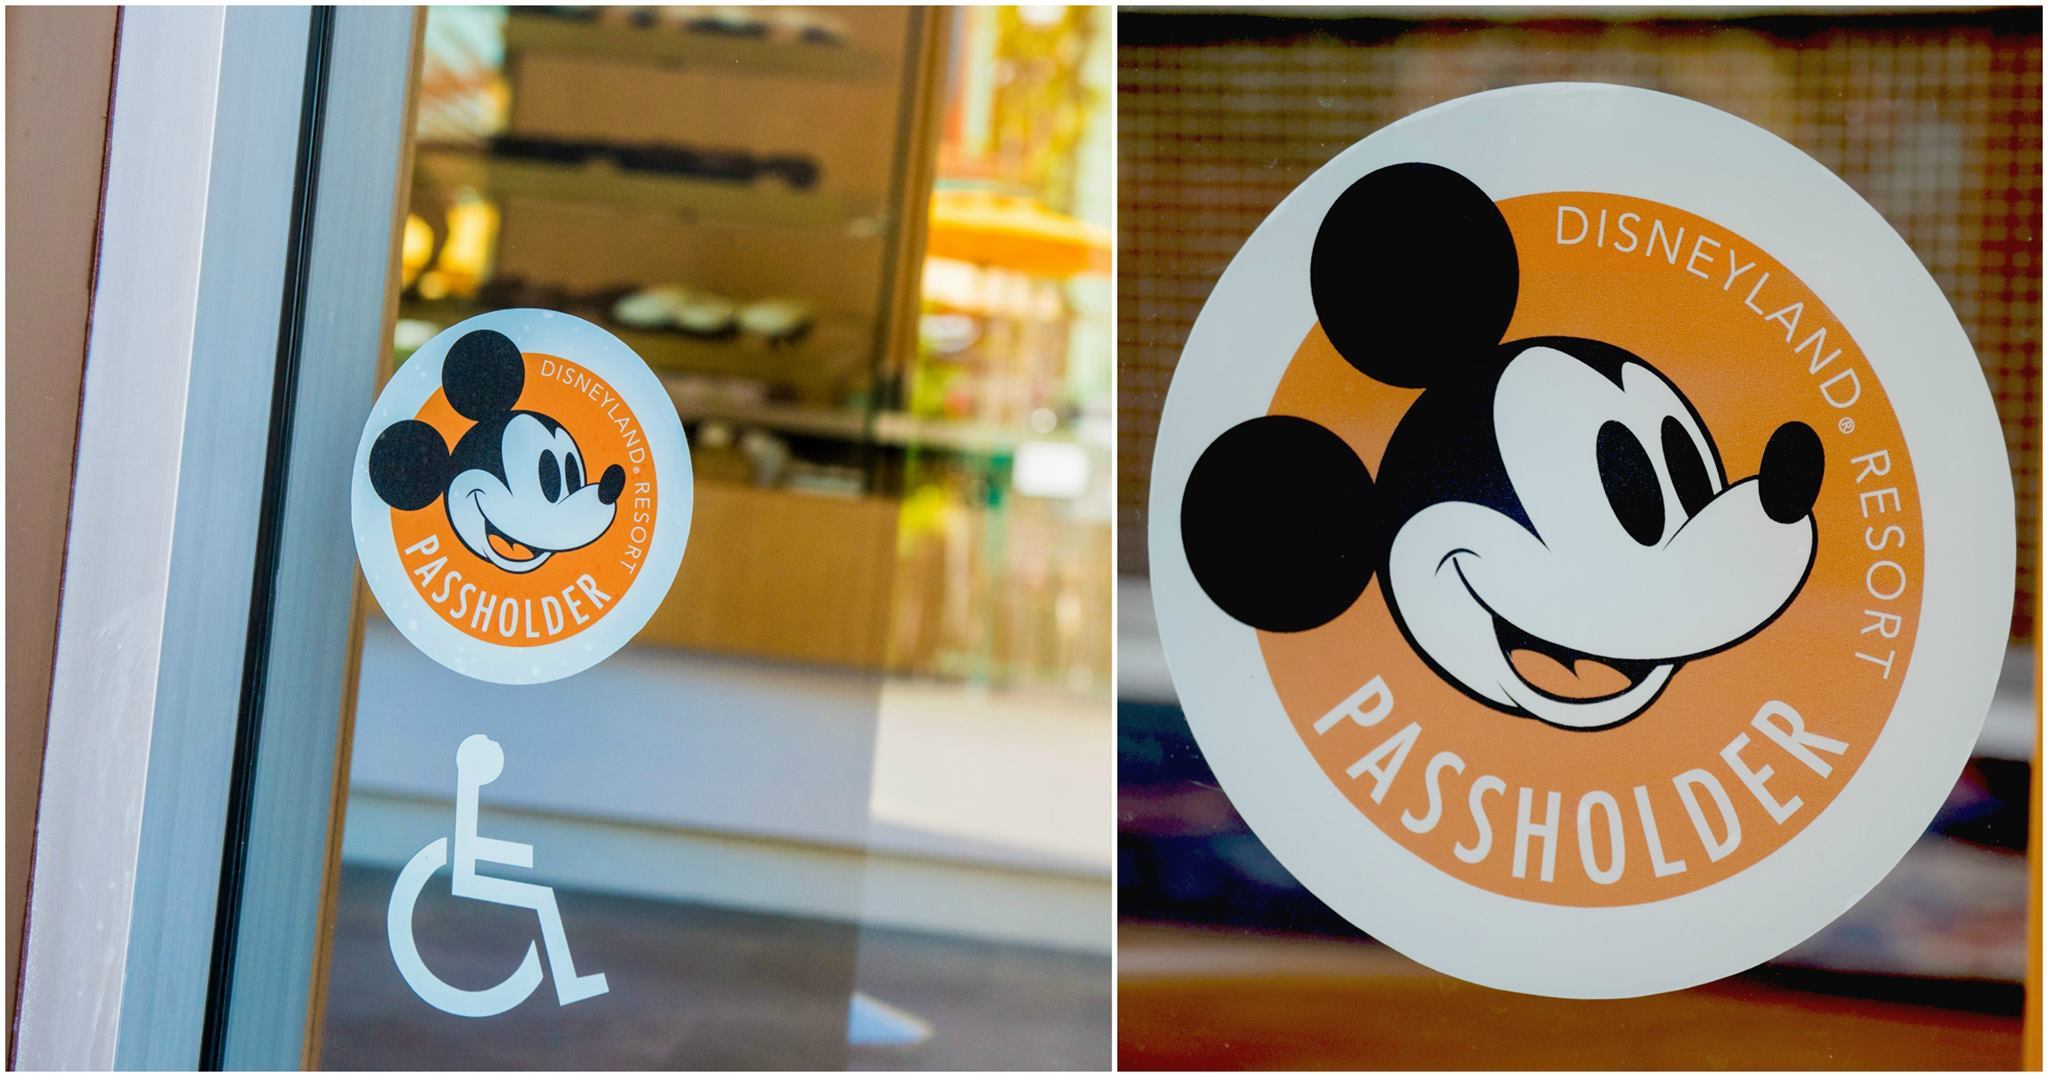 New Logo For Annual Passholder Discounts Coming To Windows In Downtown Disney District